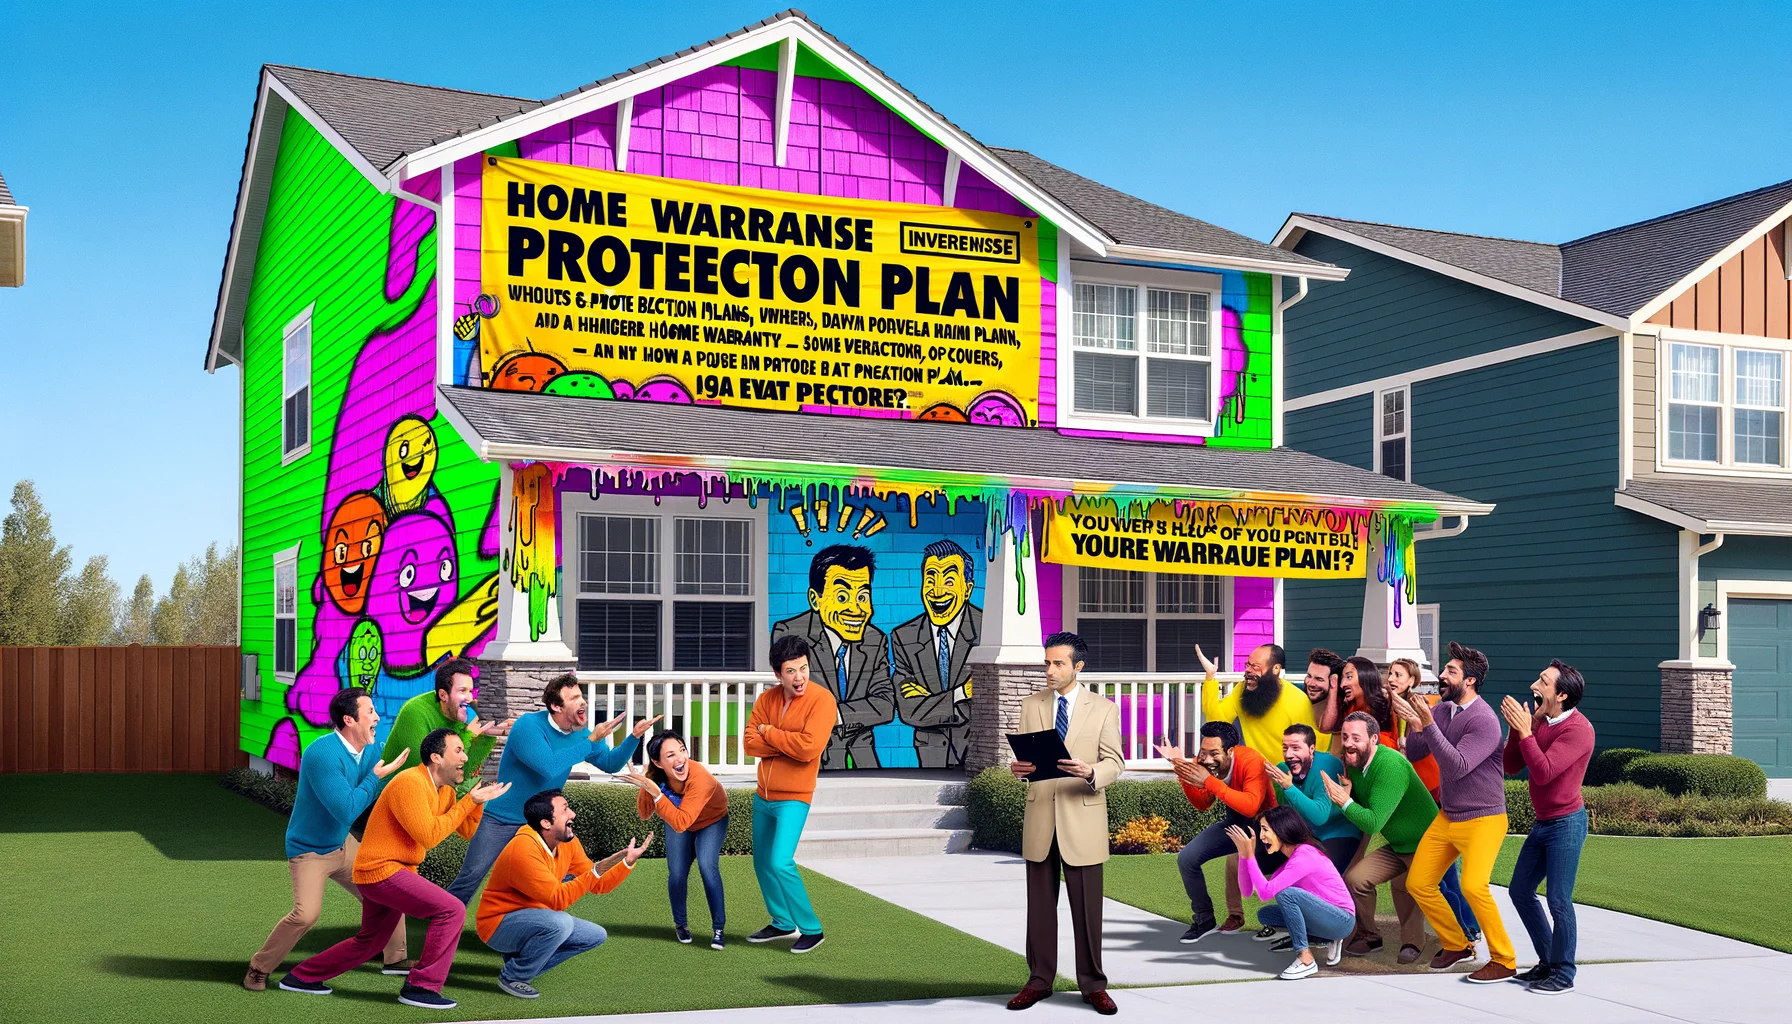 Generate an image that humorously exemplifies home warranties and protection plans. Capture a picture of a two-story, suburban home painted in bright, unexpected colors such as neon pink and lime green, with a flashy, oversized protection plan banner draped across it. Illustrate a group of laughing neighbors with diverse ethnicities, including Caucasian, Middle-Eastern, and South Asian, pointing and taking pictures of it. In the foreground, show a befuddled homeowner, a Hispanic man holding a home warranty folder, inspecting the banner with a magnifying glass. Be sure to capture the humour and absurdity of the situation in a realistic style.